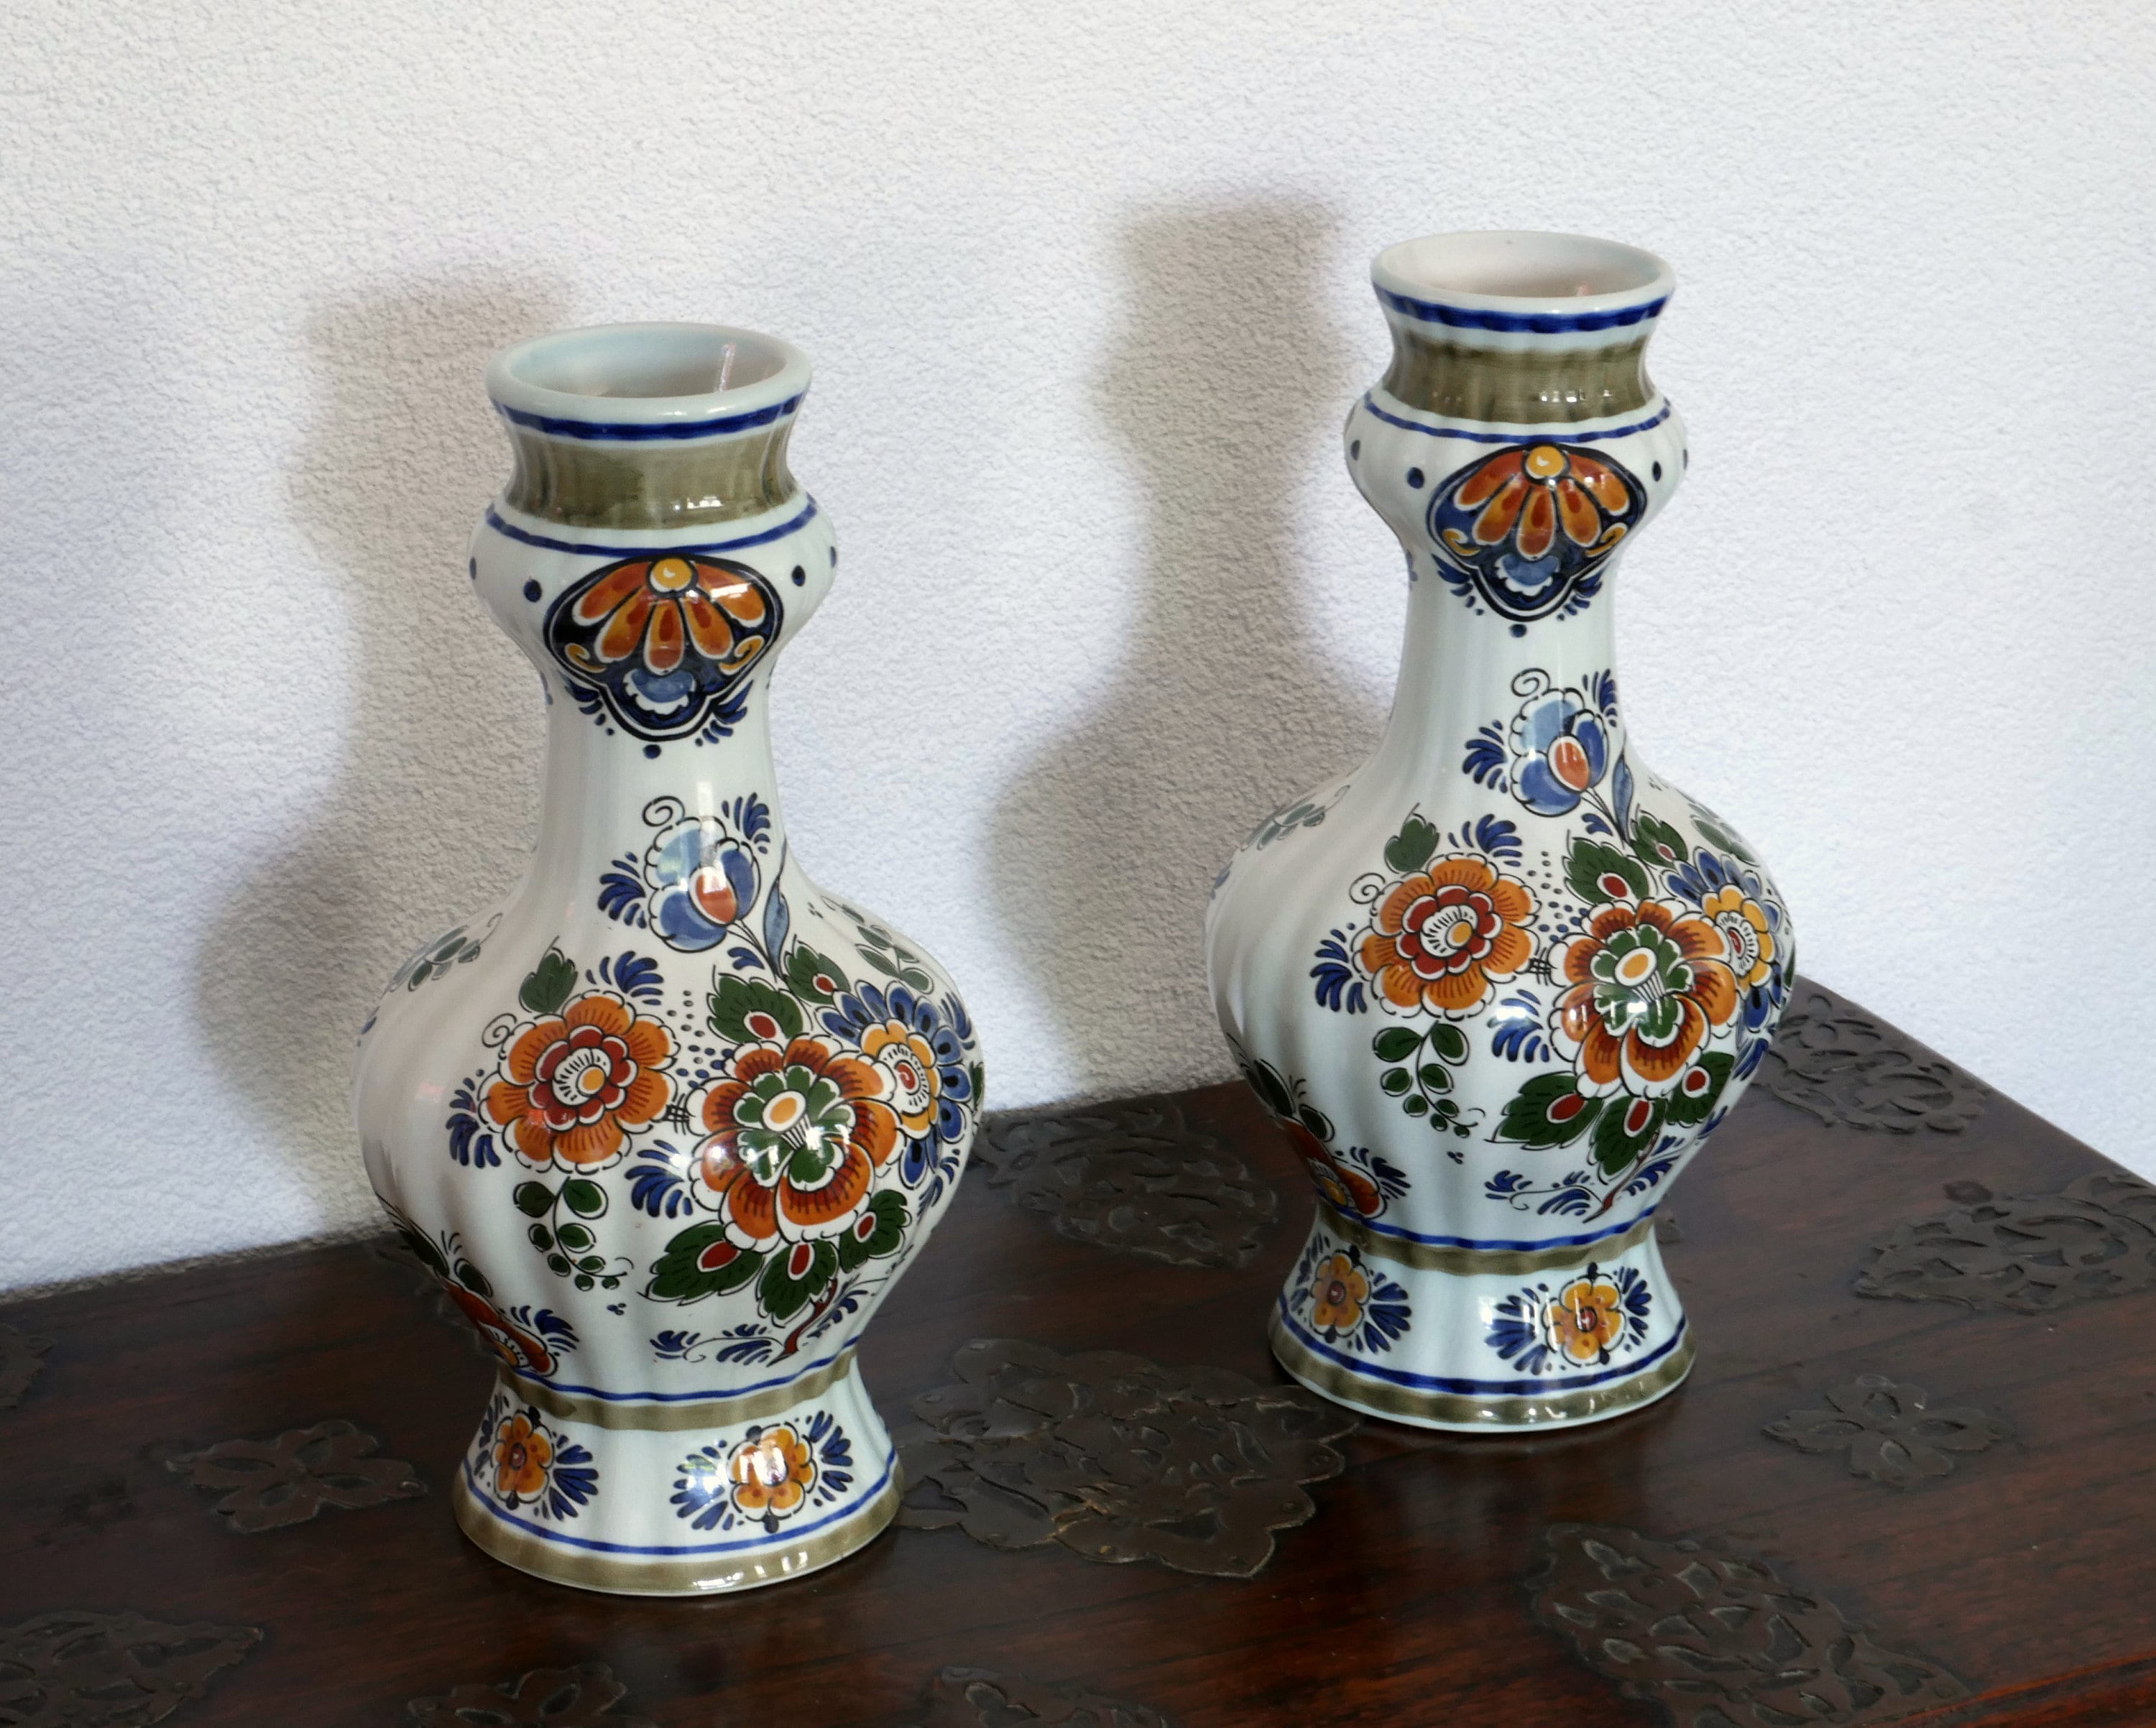 Pair of Delft Polychrome Lump Vases H22cm, Hand Painted Vintage Delftware  Dutch Heritage Pottery From Holland, Chinoiserie Flower Decor 